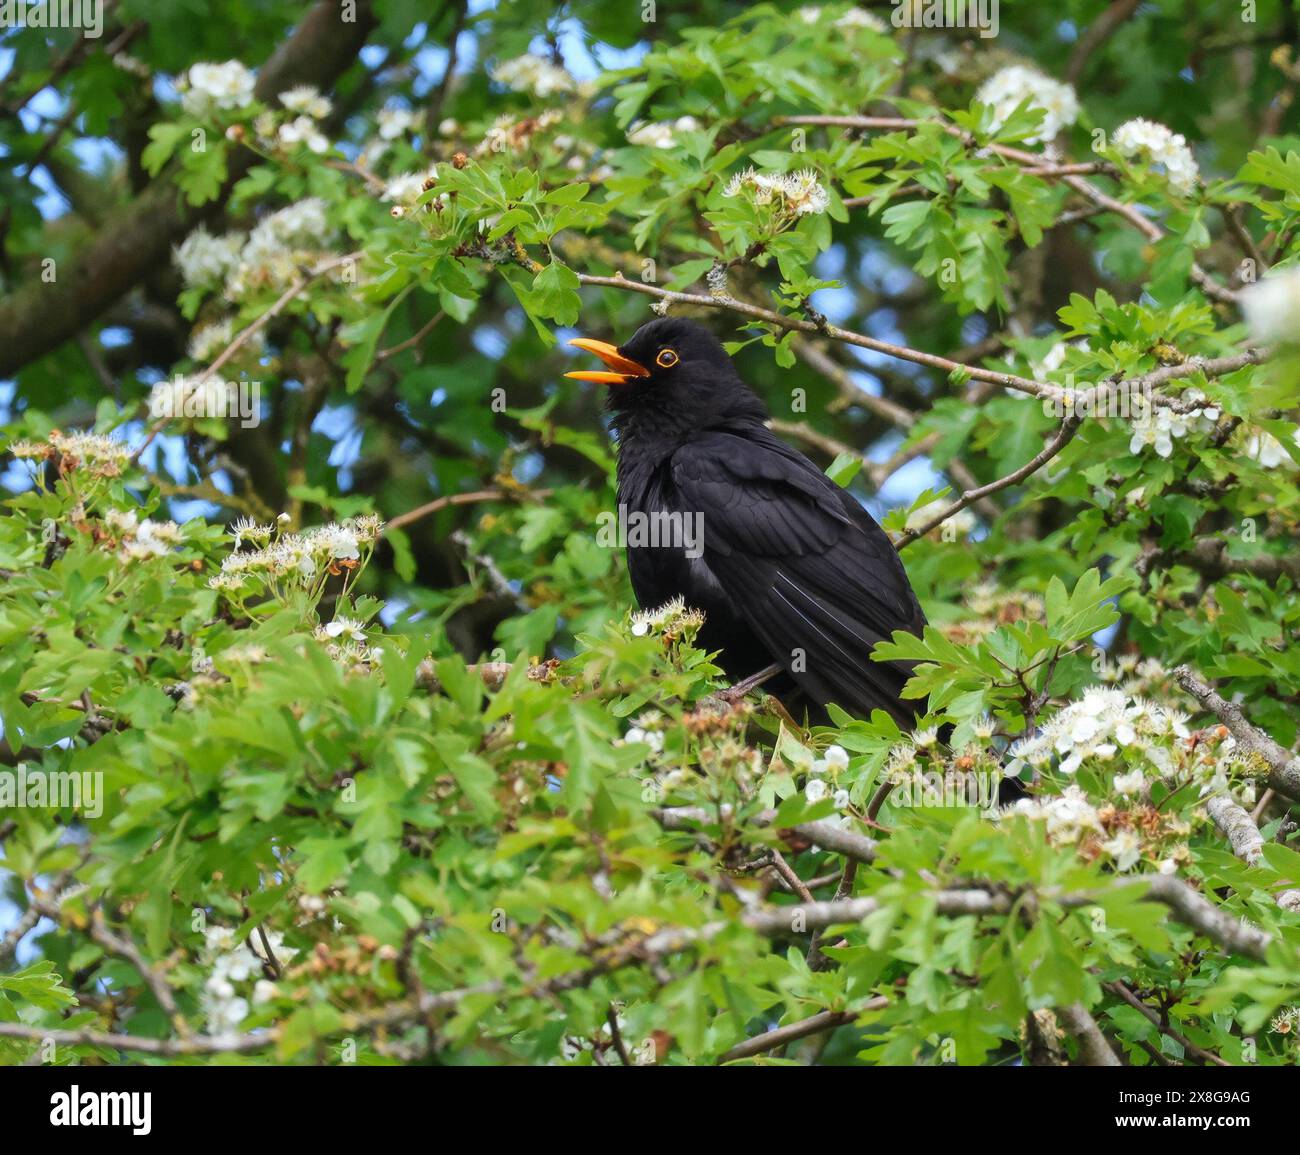 Lurgan Park, Lurgan, County Armagh, Northern Ireland, UK. 25th May 2024. UK weather - a day with sunny spells and a strong south-easterly breeze as wildlife makes the best of a late spring day. A blackbird chirps happily in a tree of white blossom. Credit: CAZIMB/Alamy Live News. Stock Photo